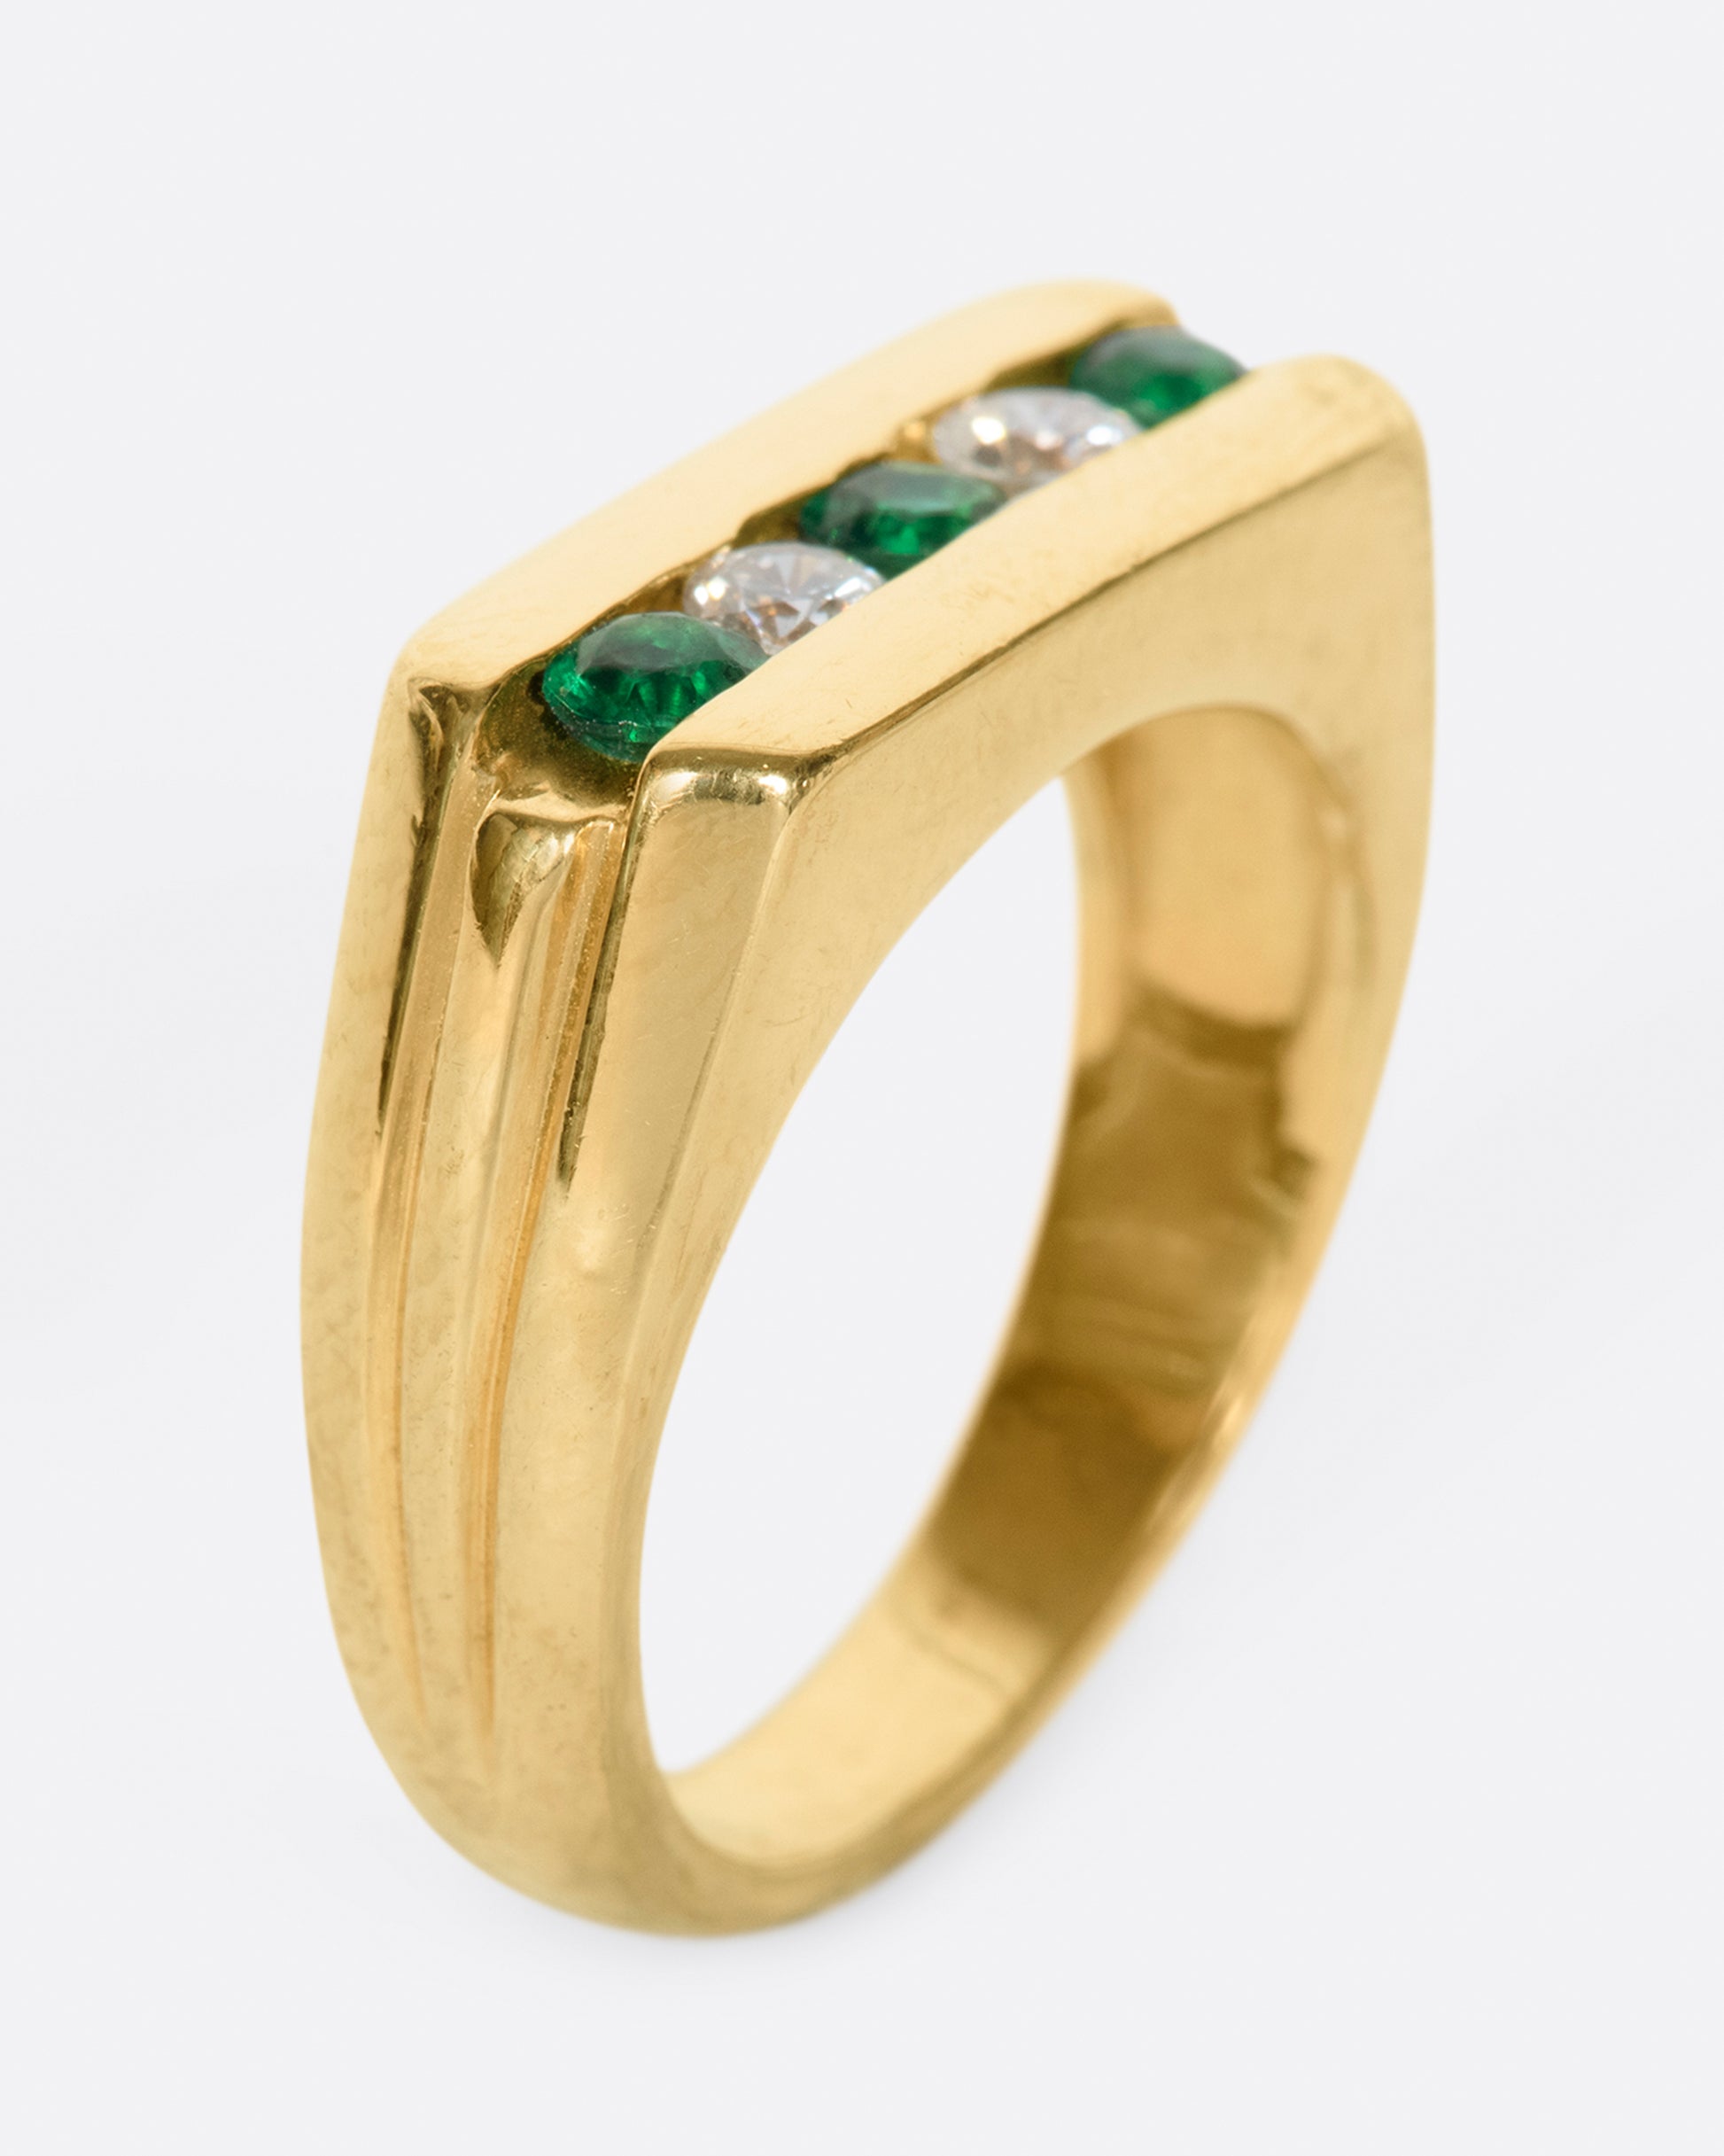 The face of this ring features five channel set stones; three emeralds and two diamonds.